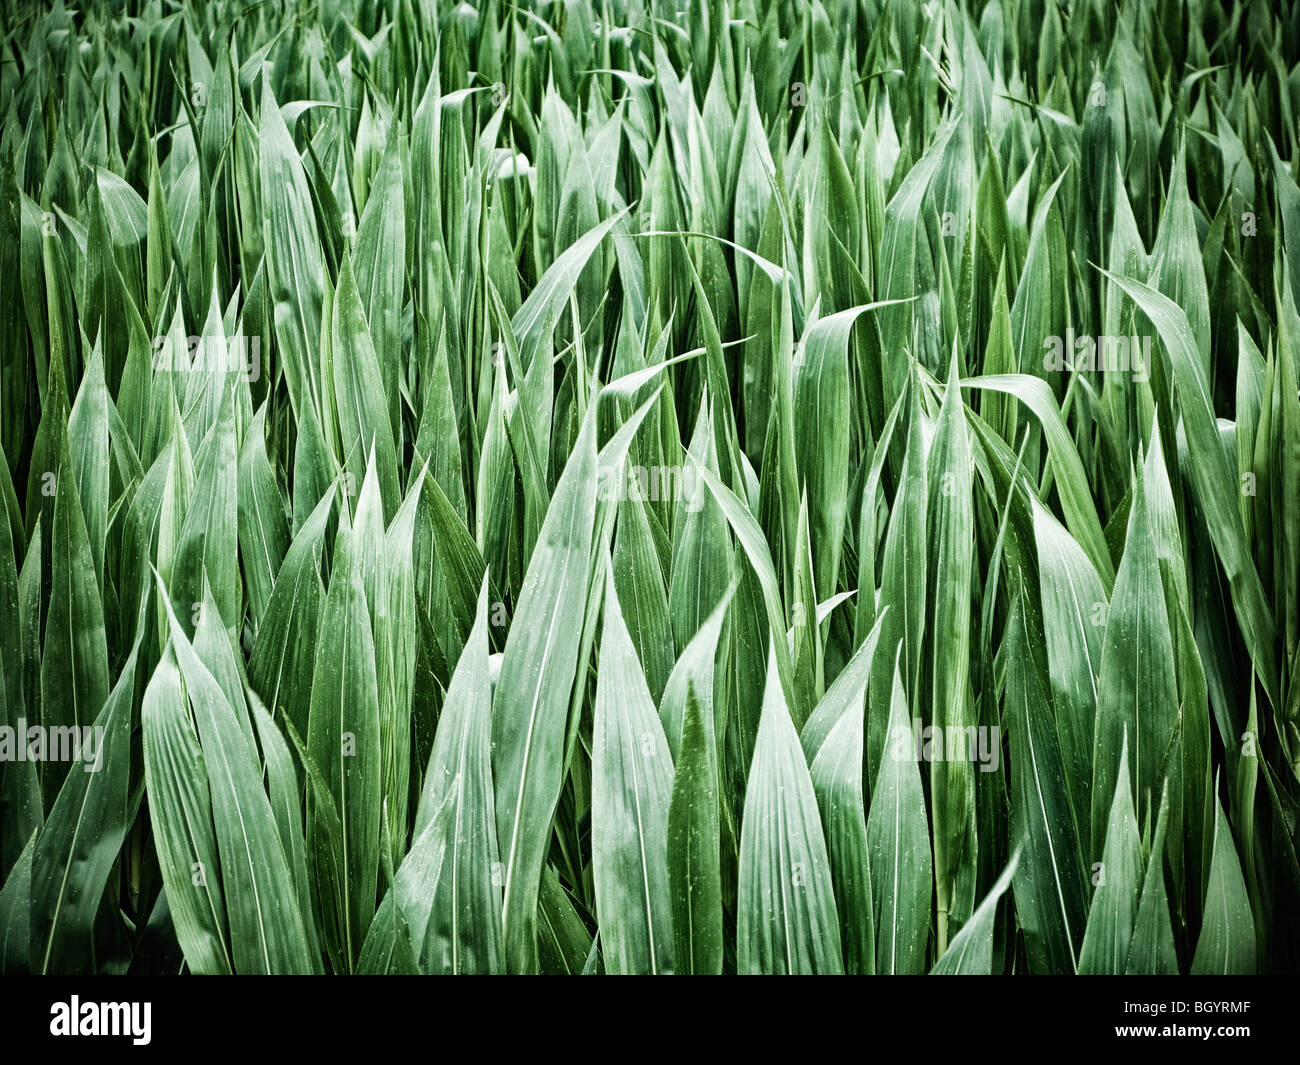 Maize crop leaves close up Stock Photo